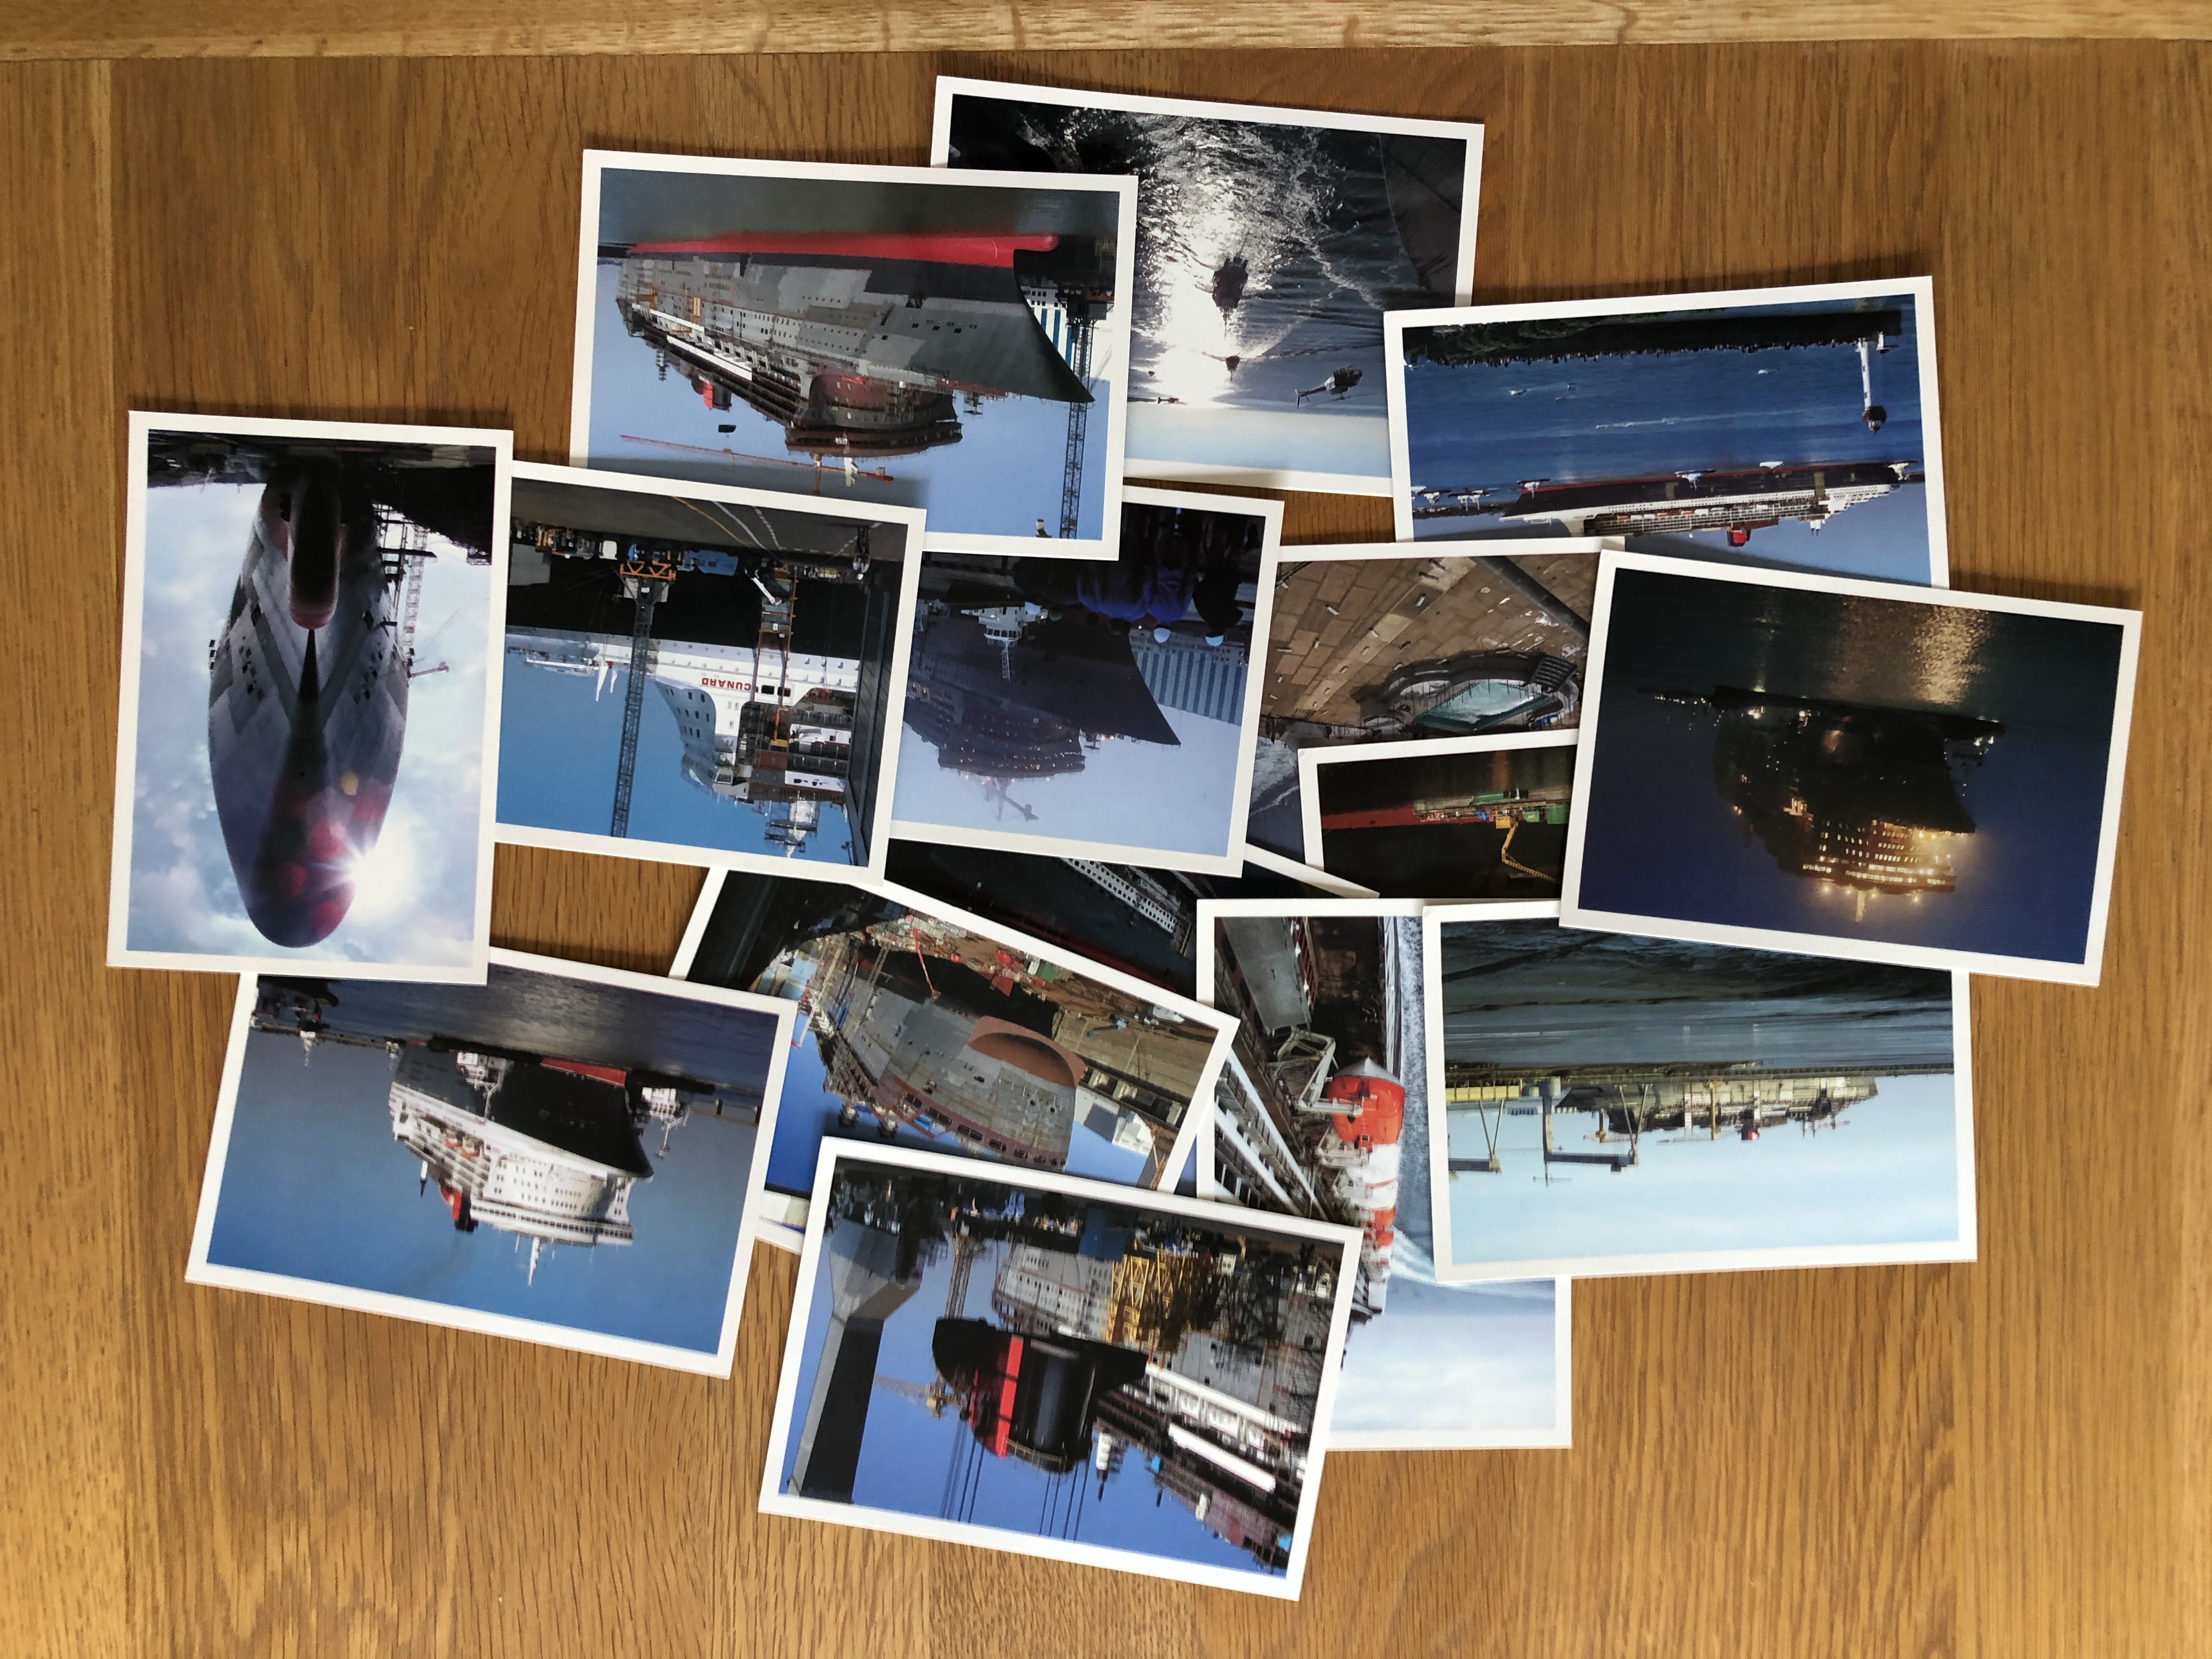 SET OF 24 FULL COLOUR POSTCARD STYLE PHOTOS FROM THE LAUNCH OF THE RMS QUEEN MARY 2